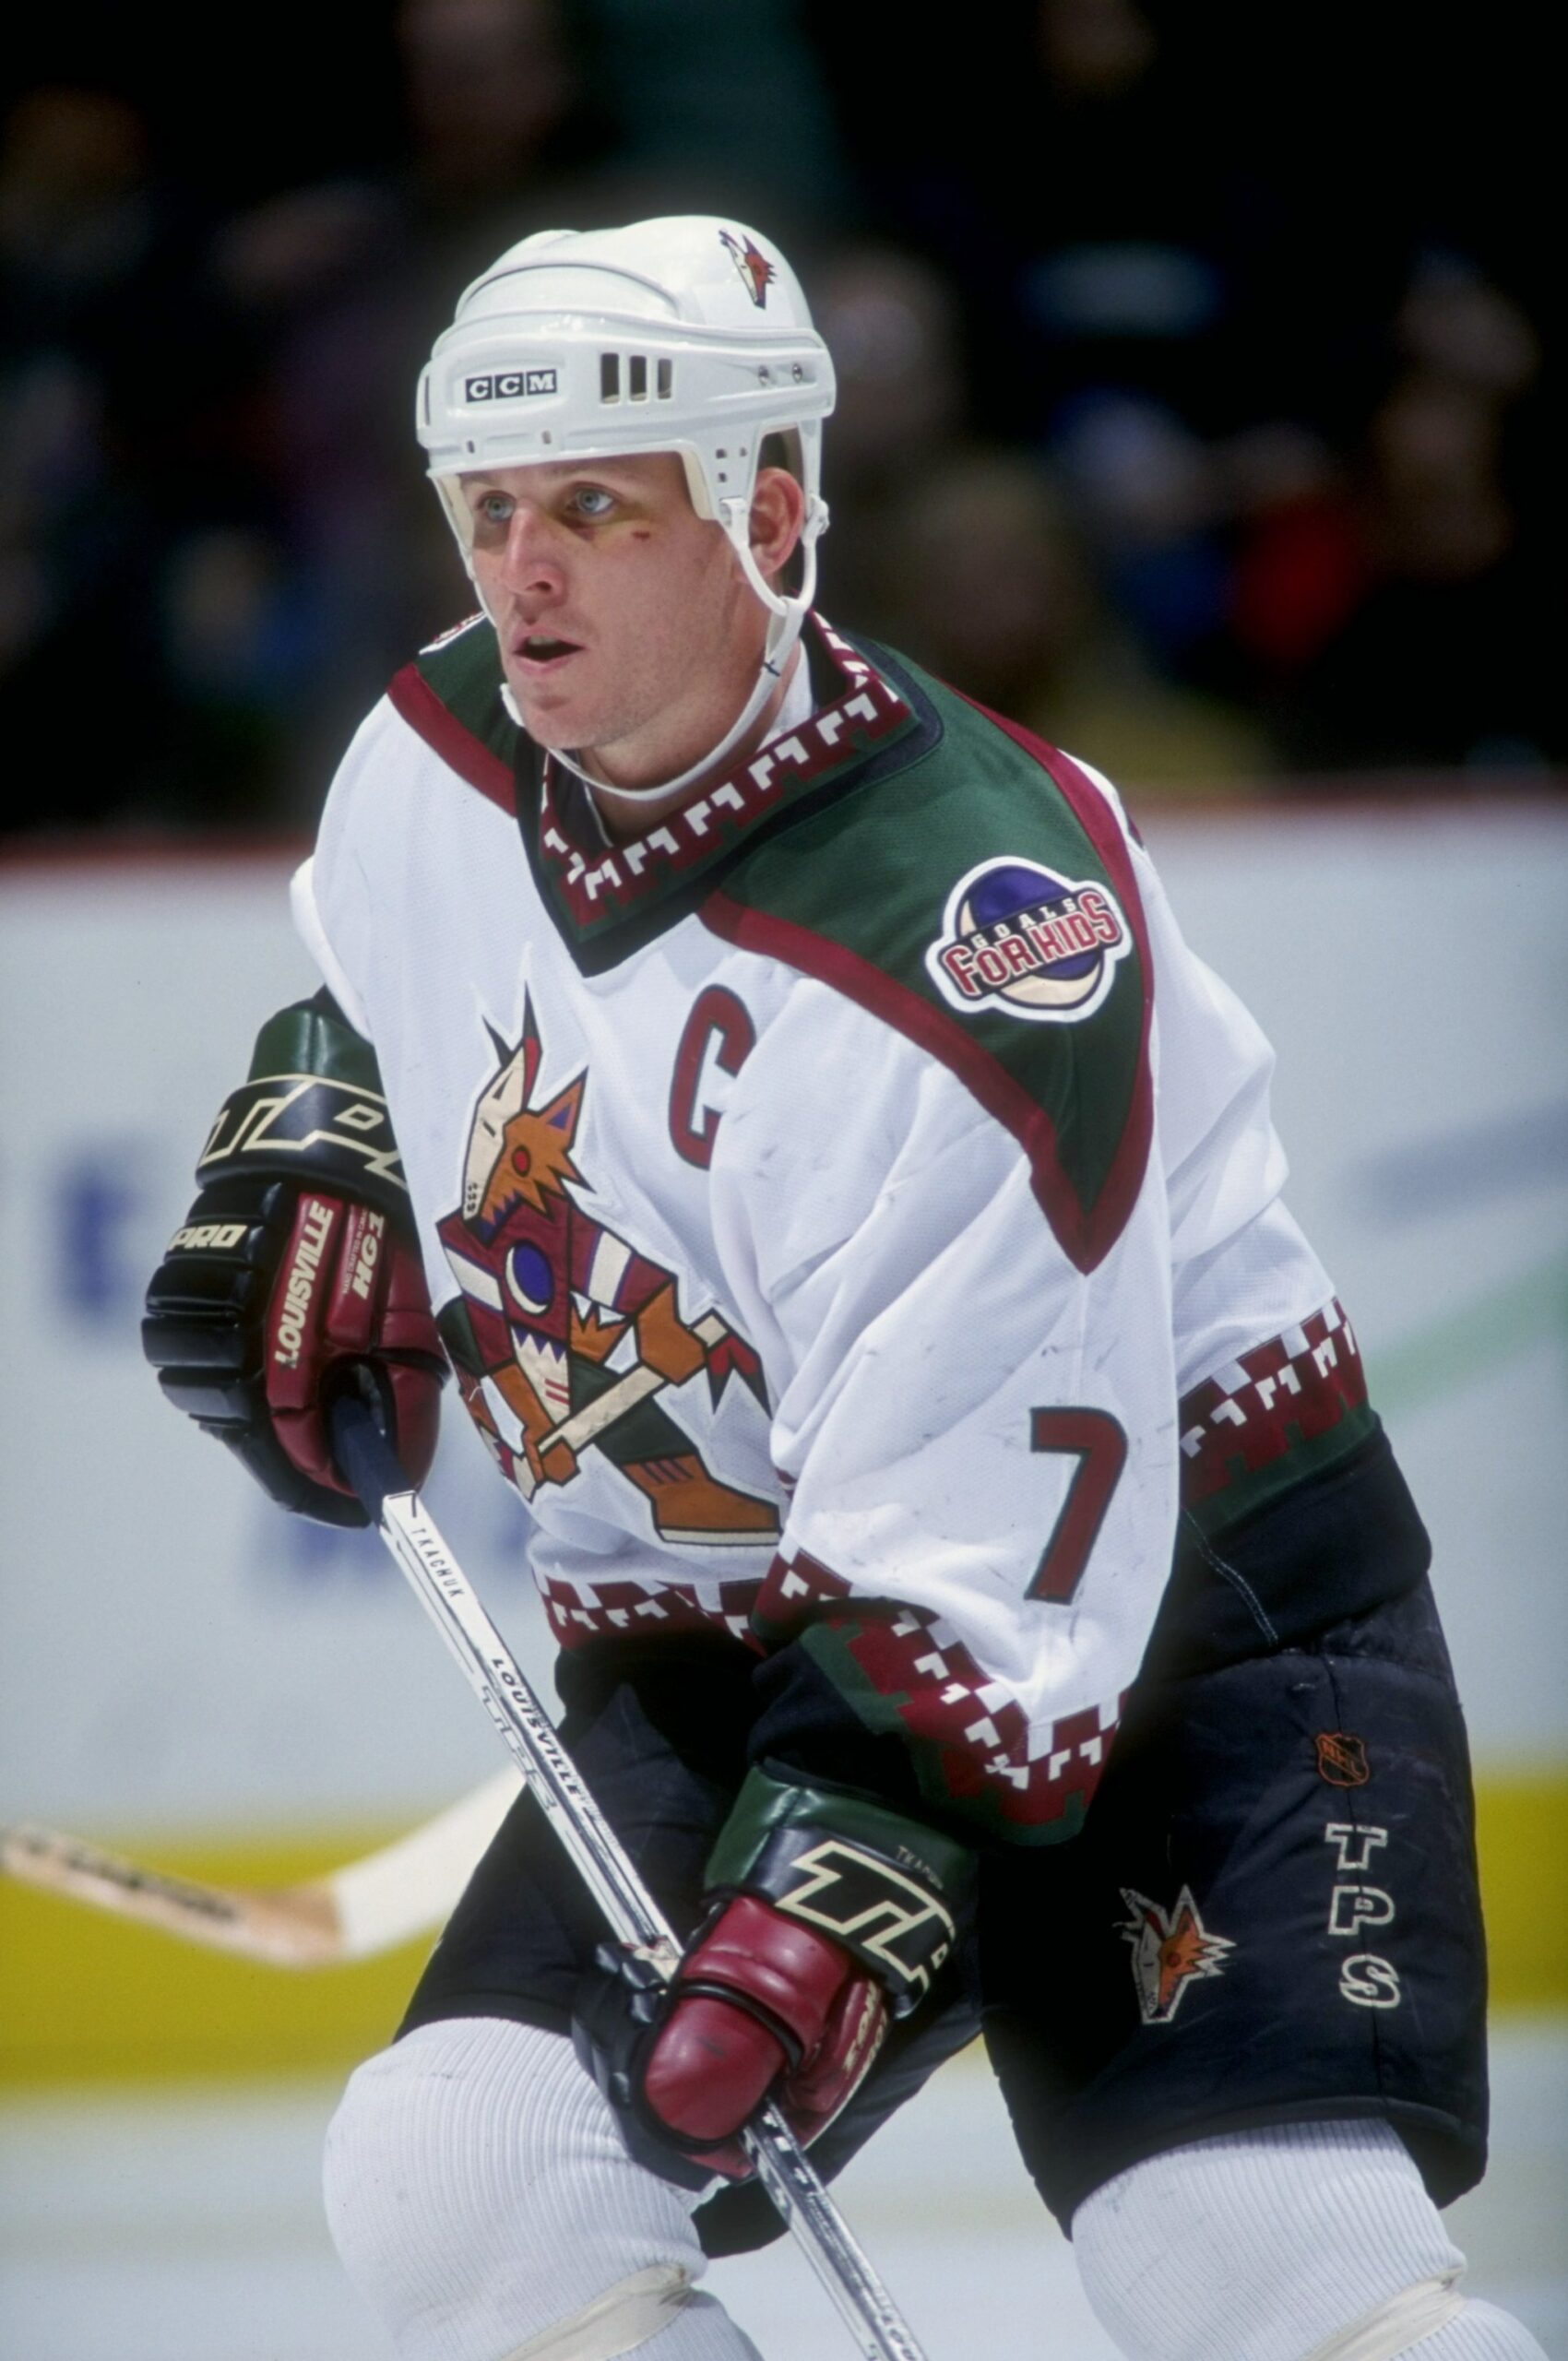 Arizona Coyotes: 'Kachina' logo voted as greatest in Valley sports